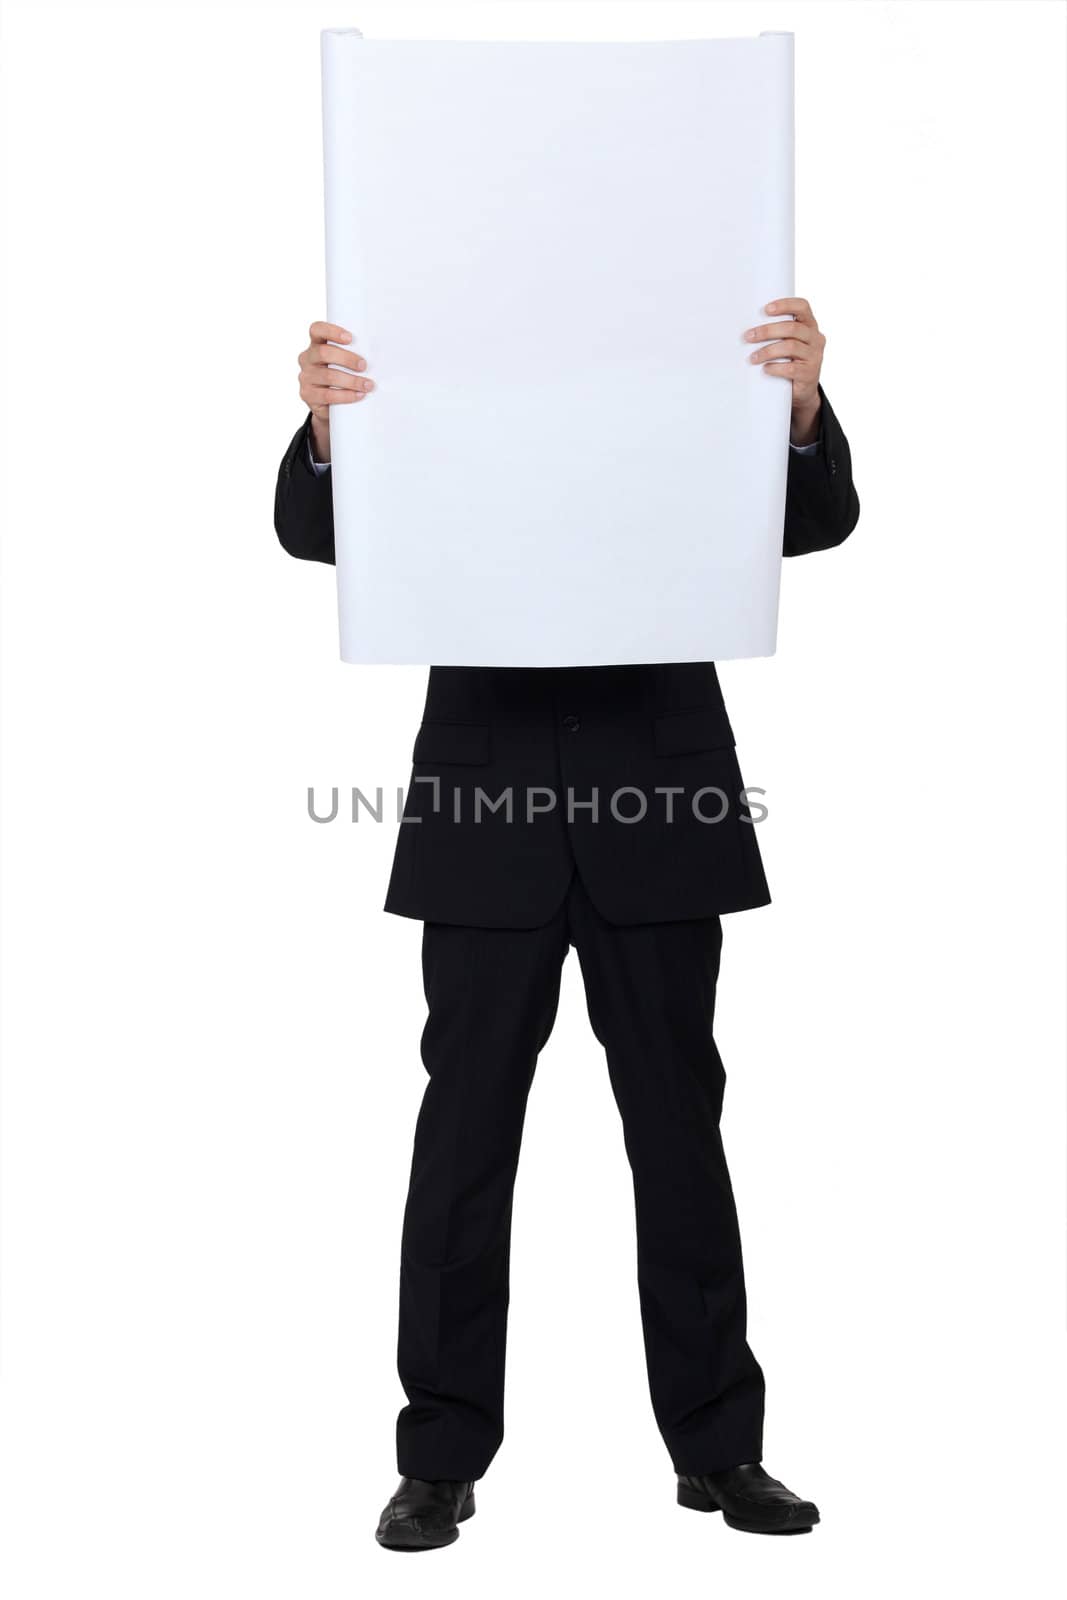 Man hidden behind a white panel for message by phovoir